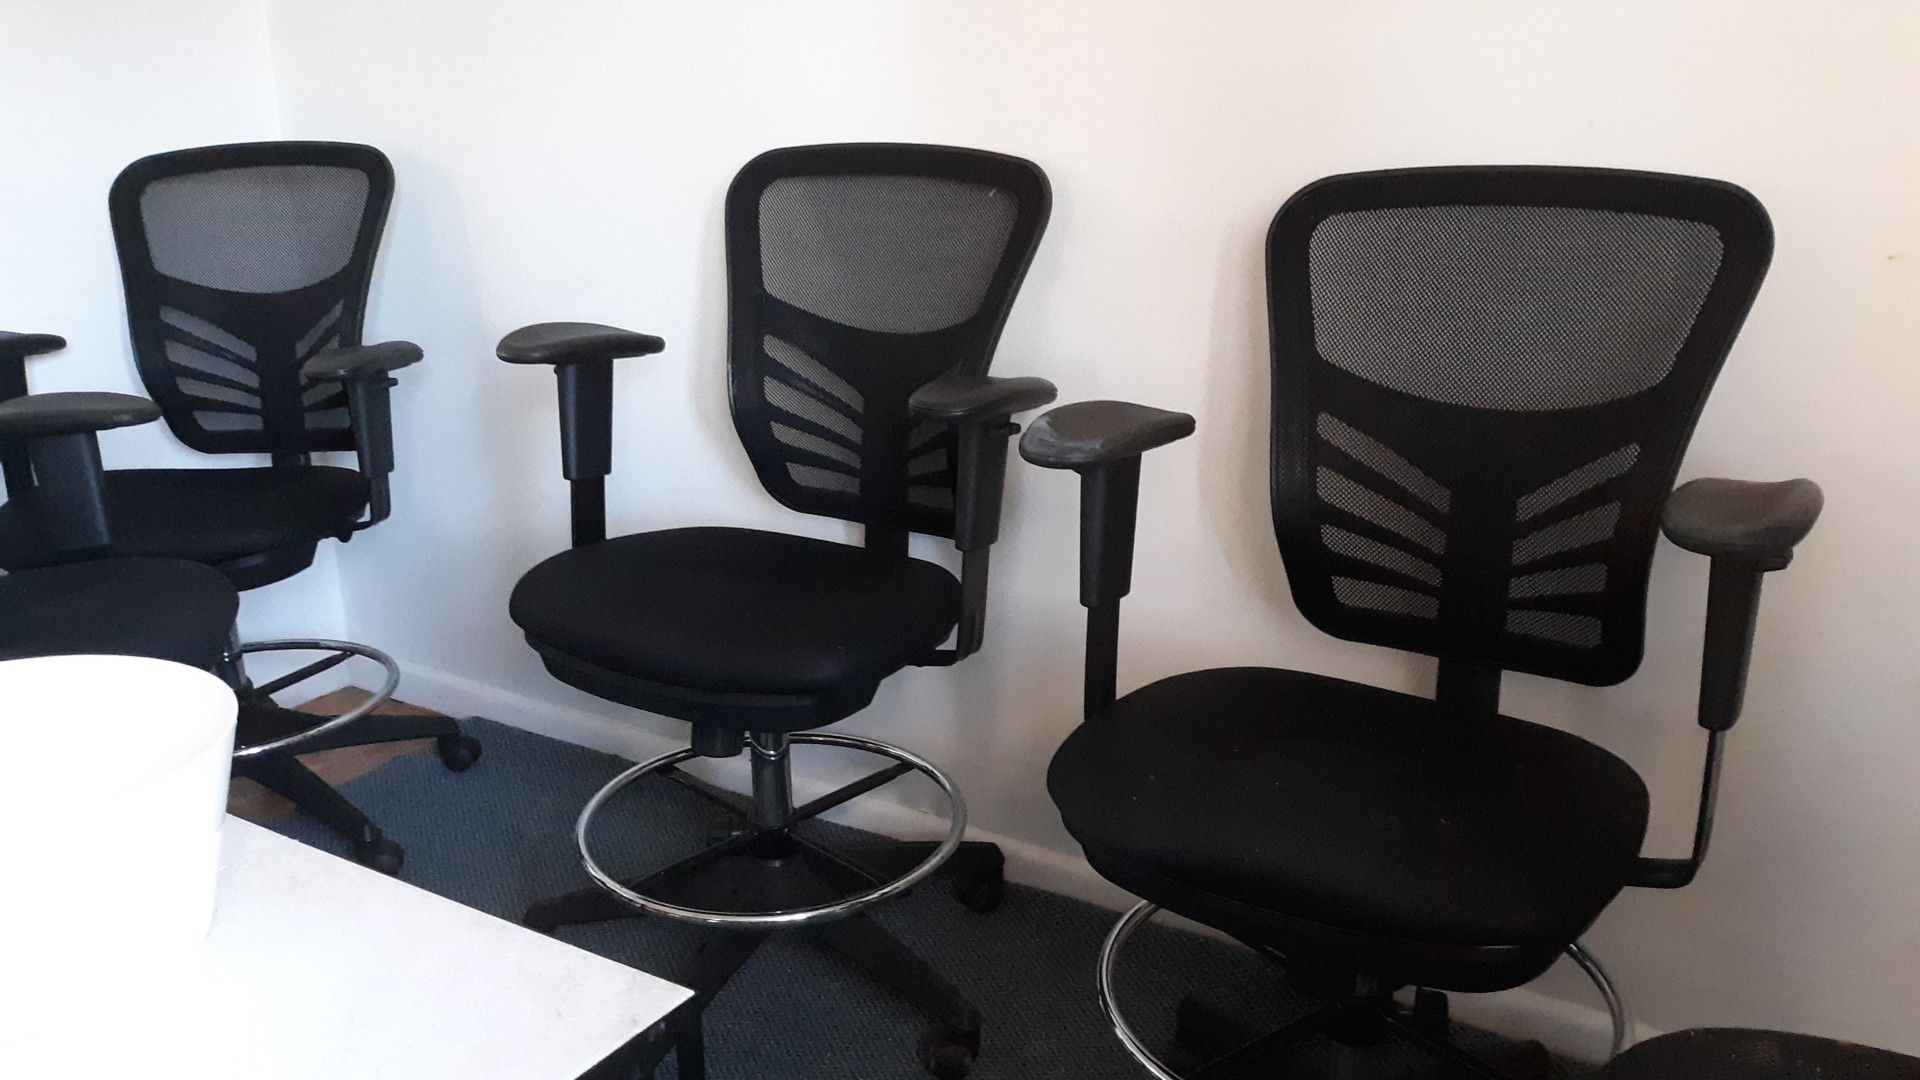 Office desk chair stools that raise up to stool height